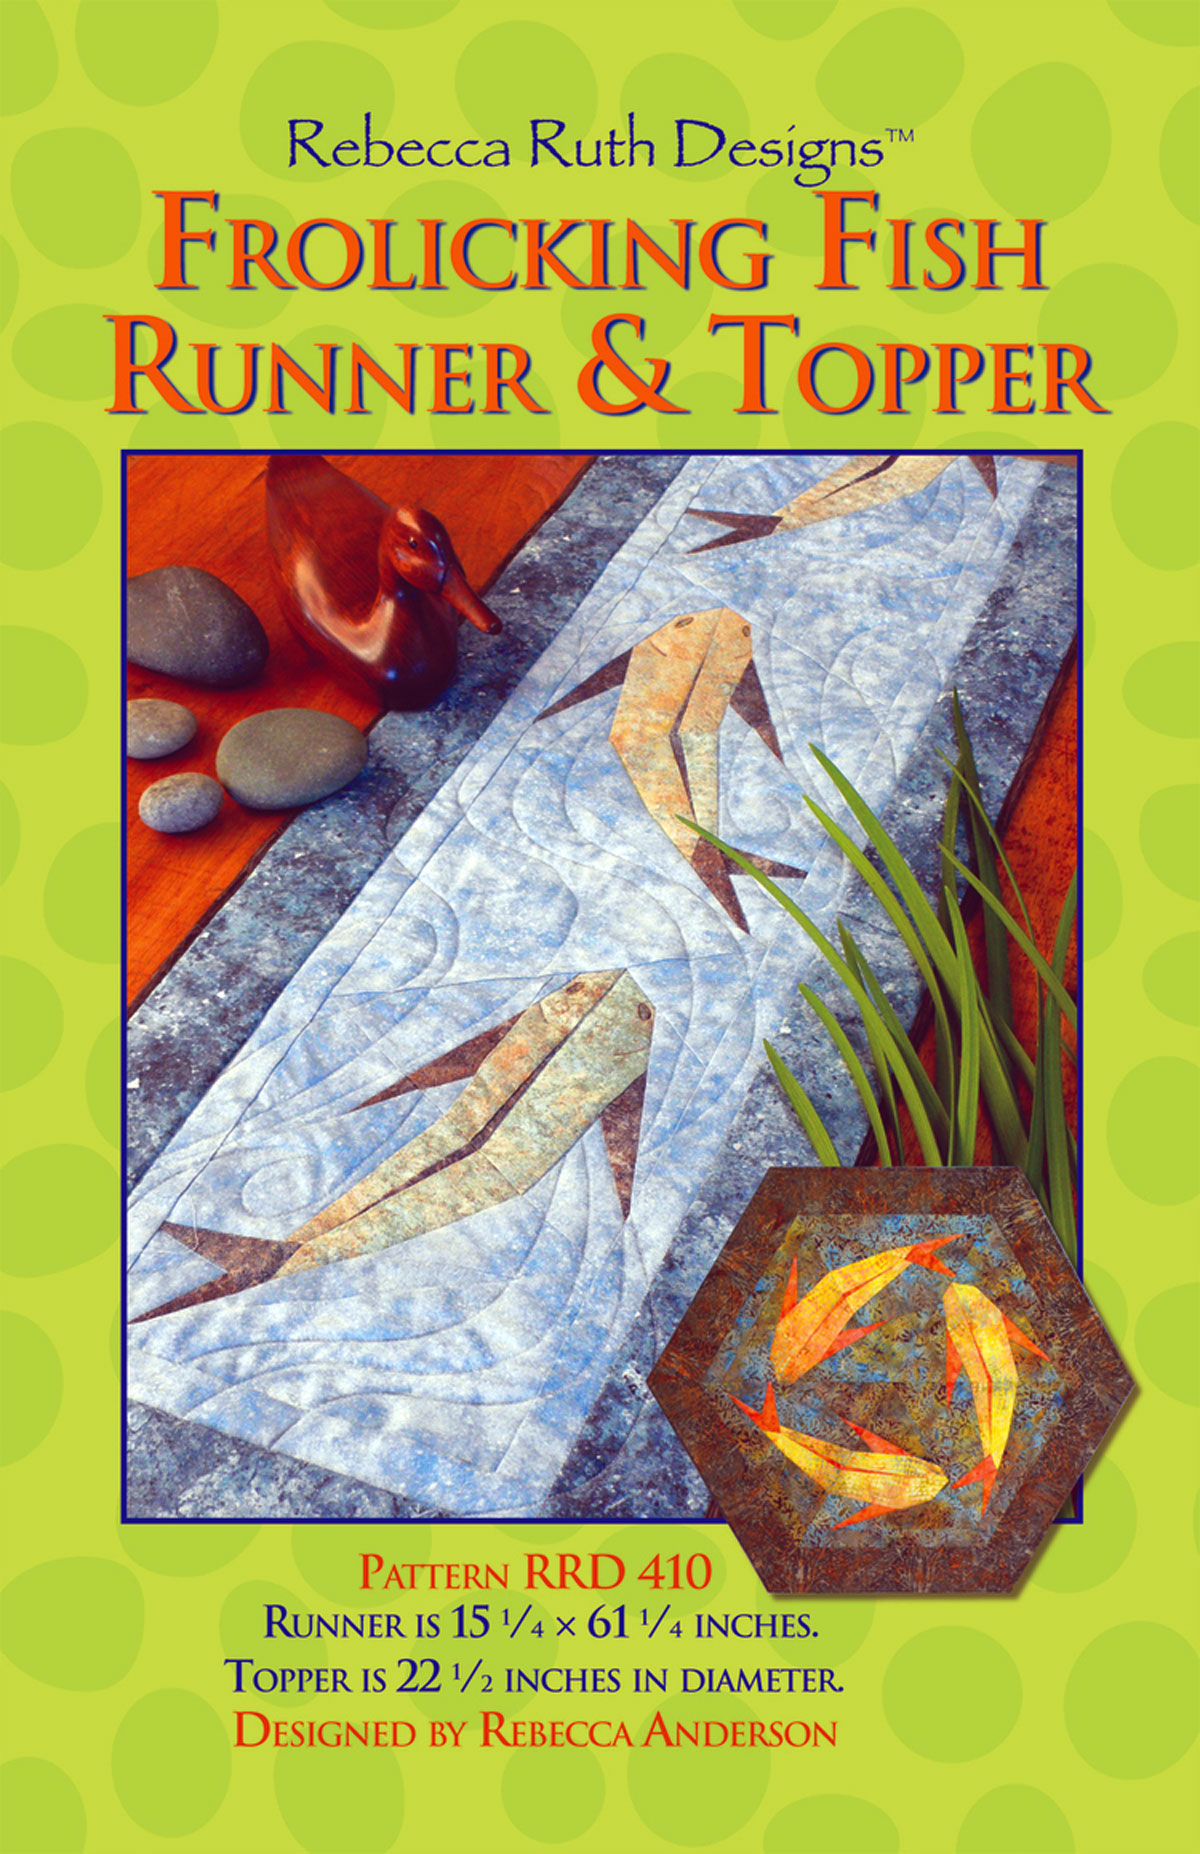 Frolicking-Fish-table-runner-sewing-pattern-rebecca-ruth-designs-front